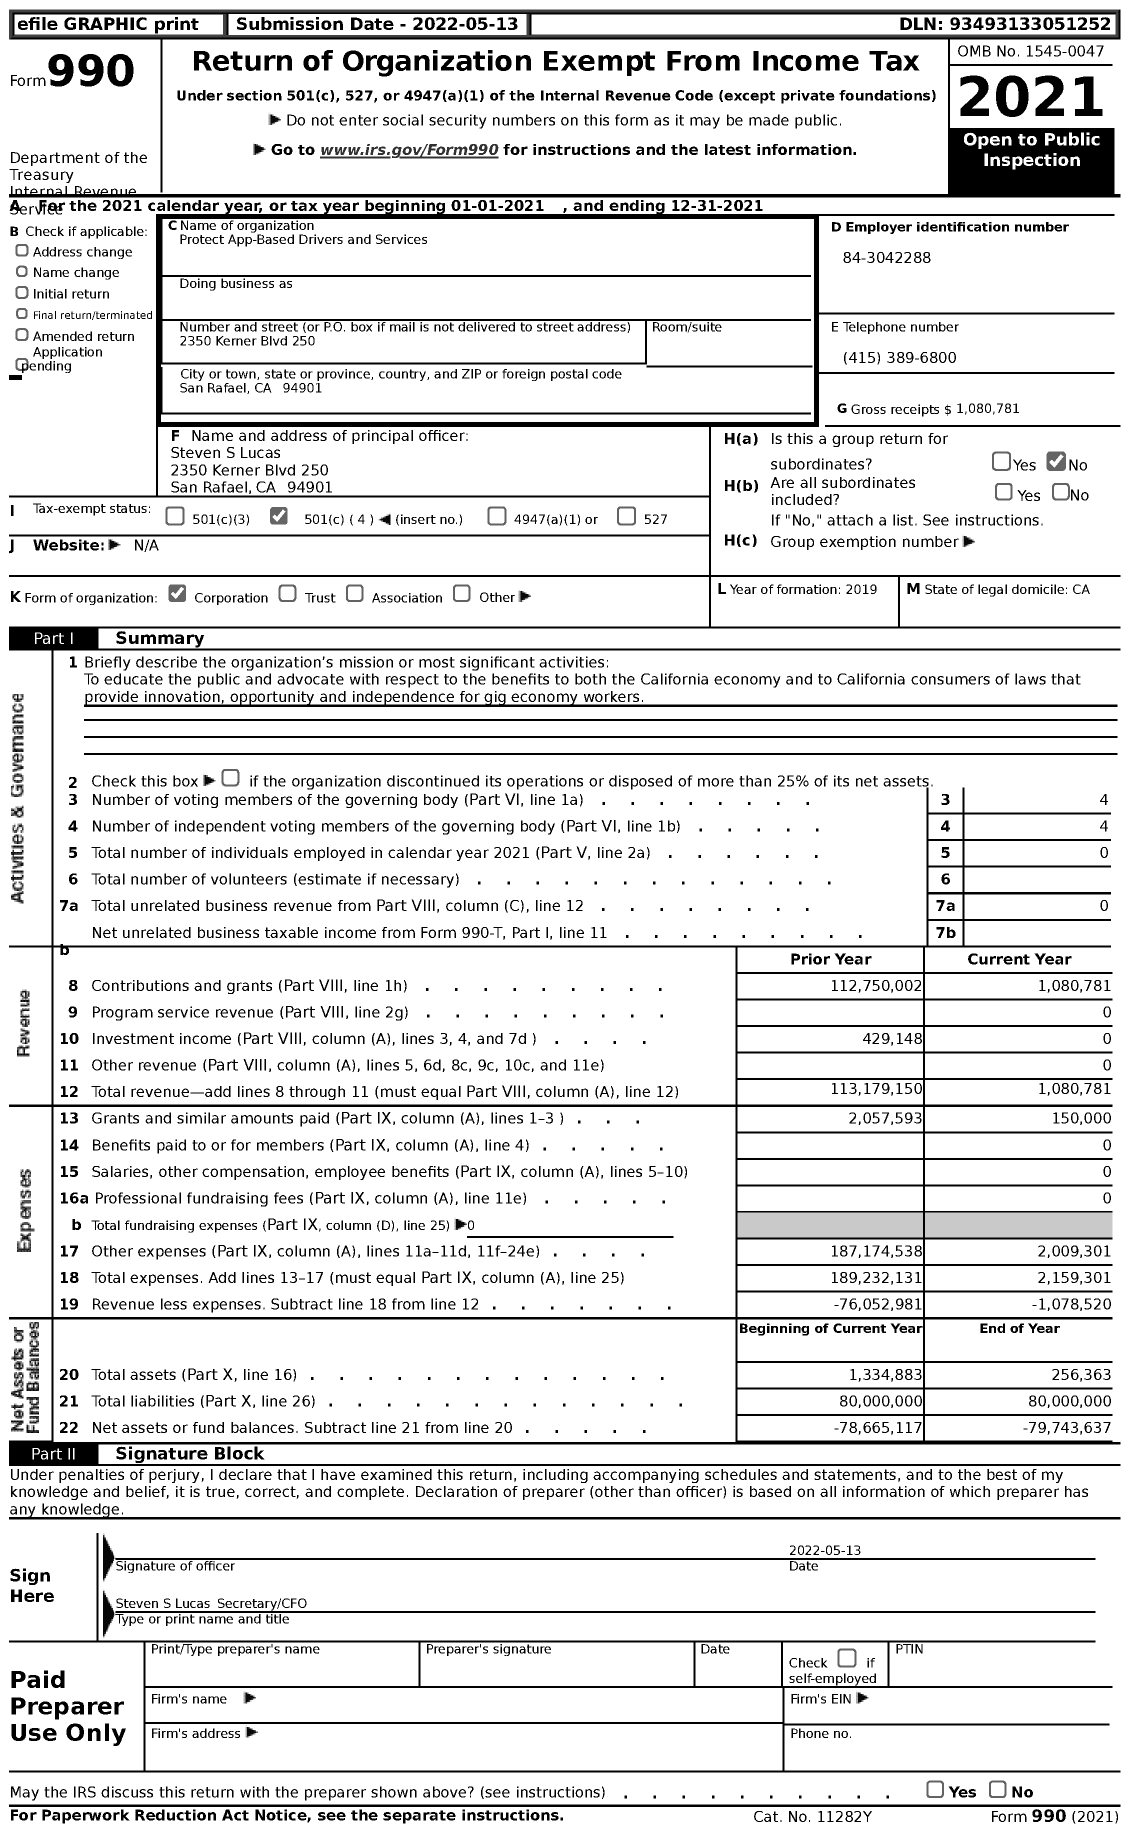 Image of first page of 2021 Form 990 for Protect App-Based Drivers and Services